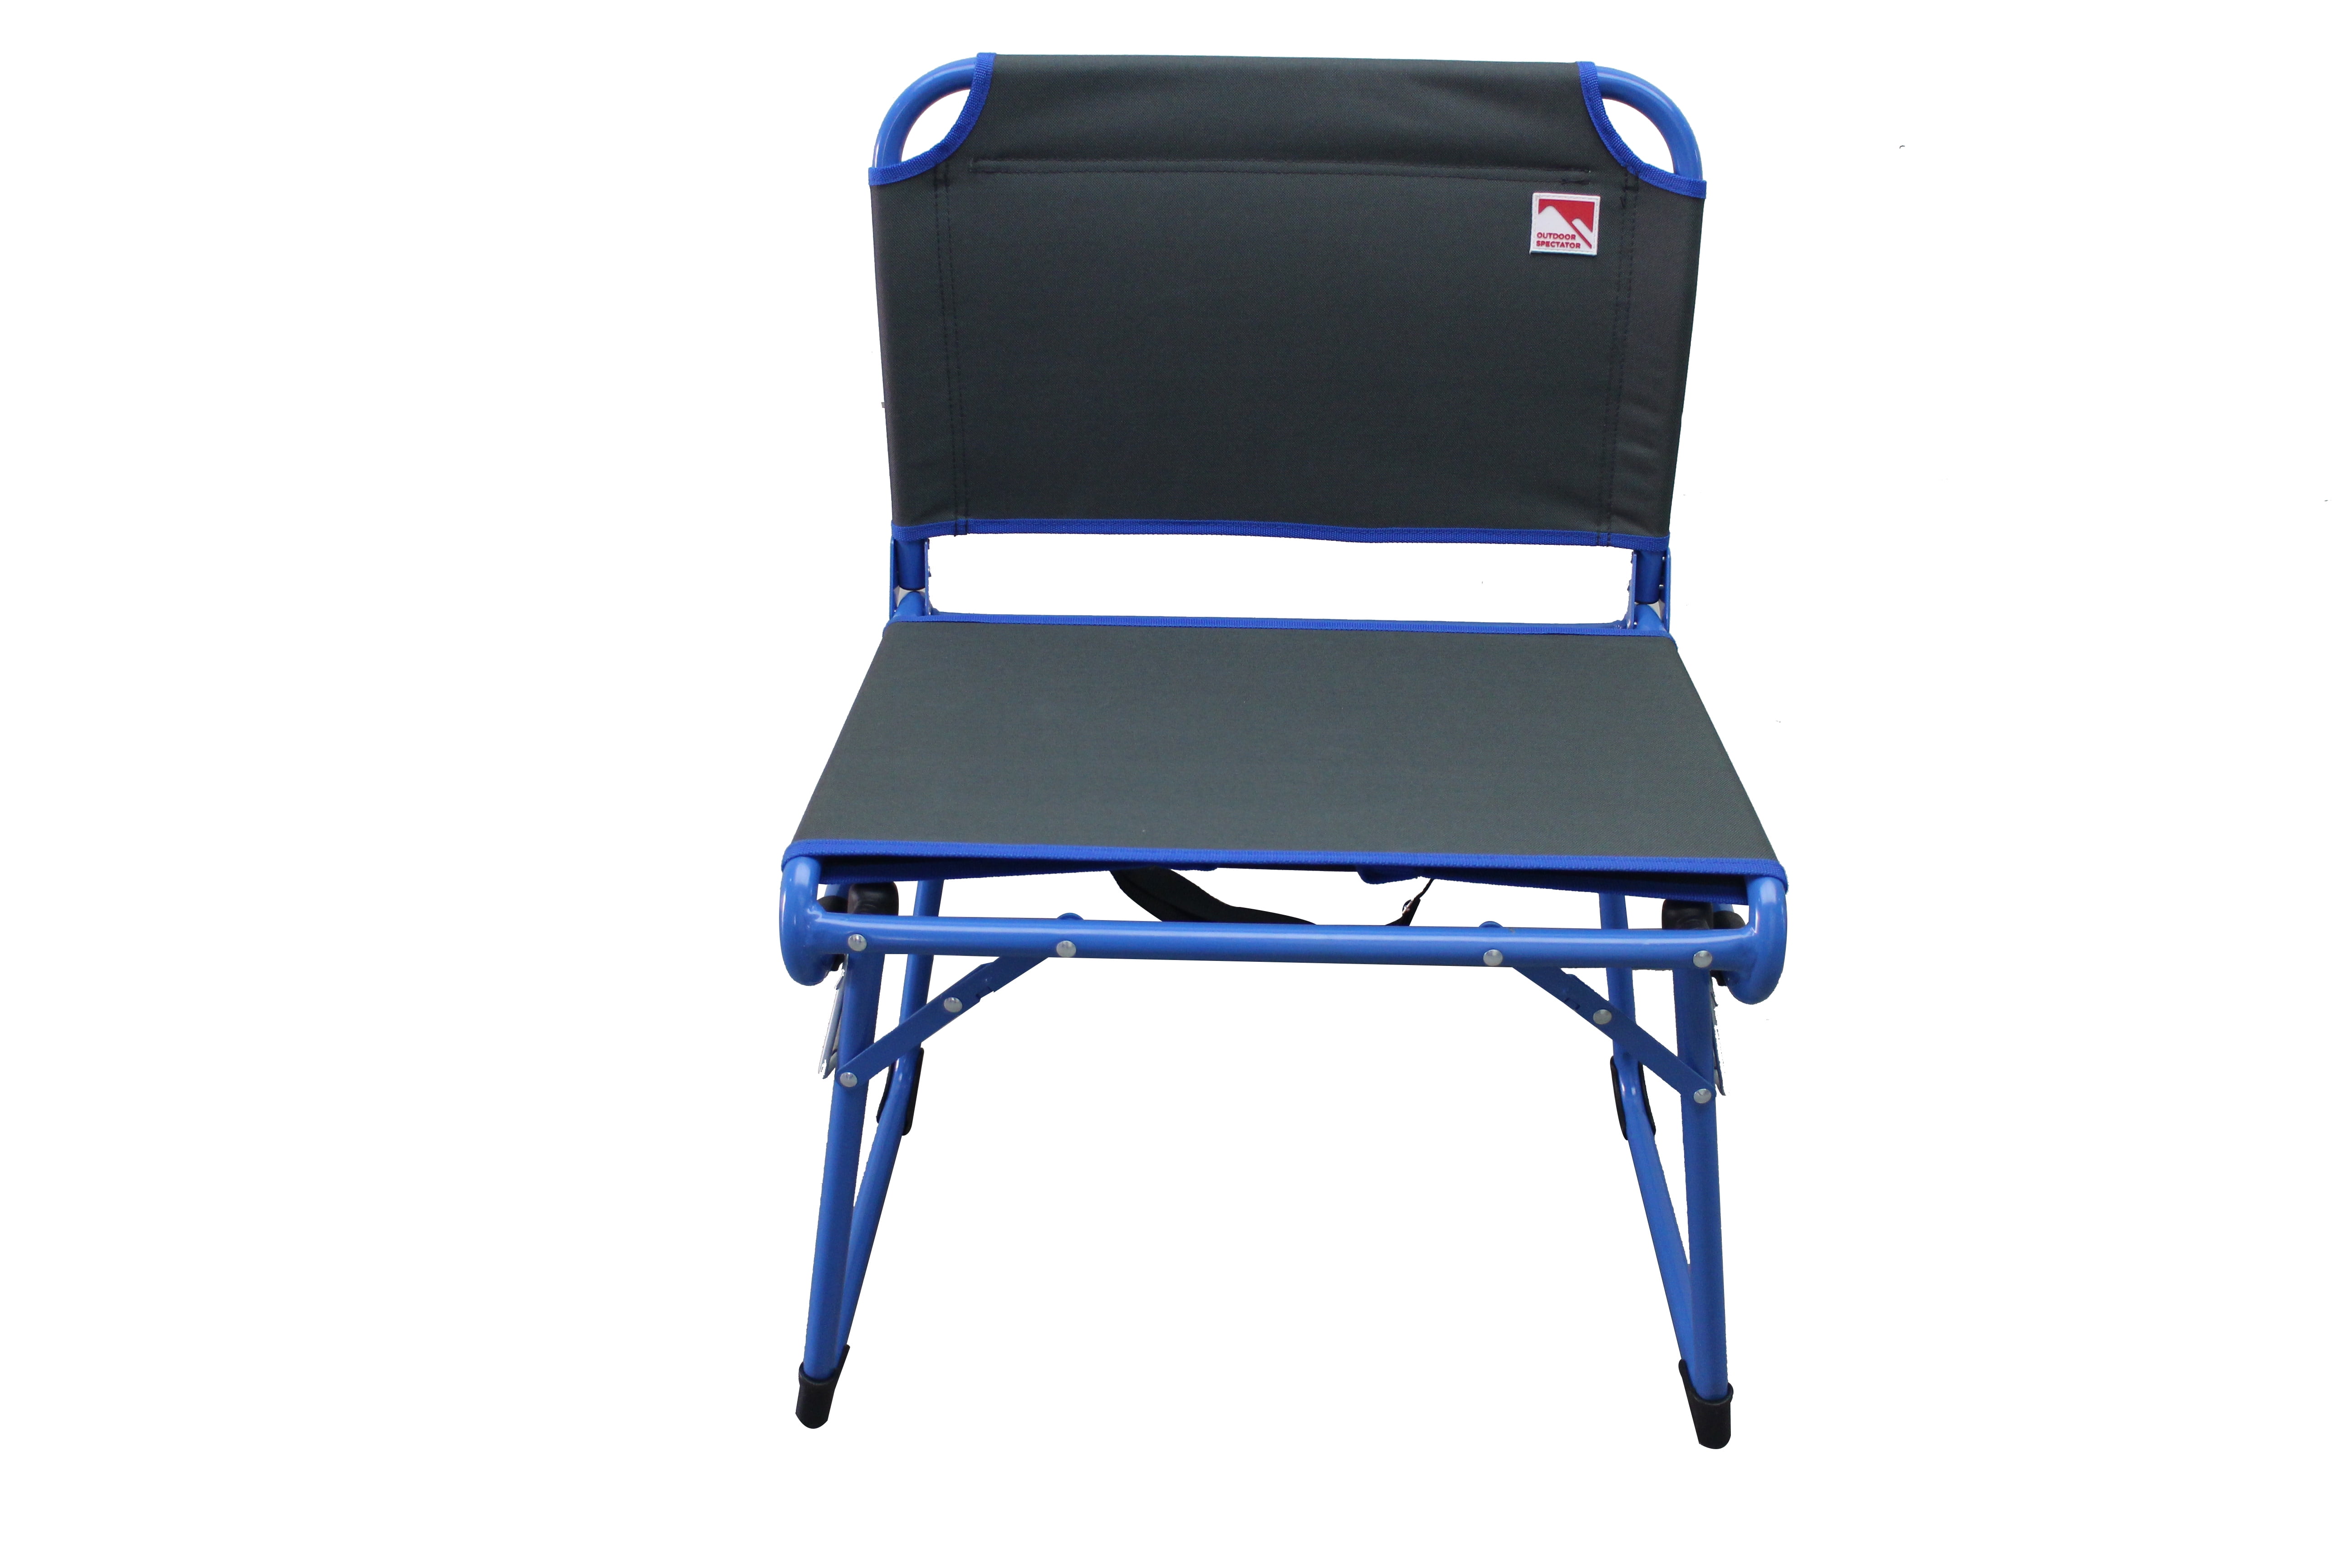 Details about   2PCS Stadium Seat Padded Folding Bleacher Cushion Football Outdoor Sports Chairs 